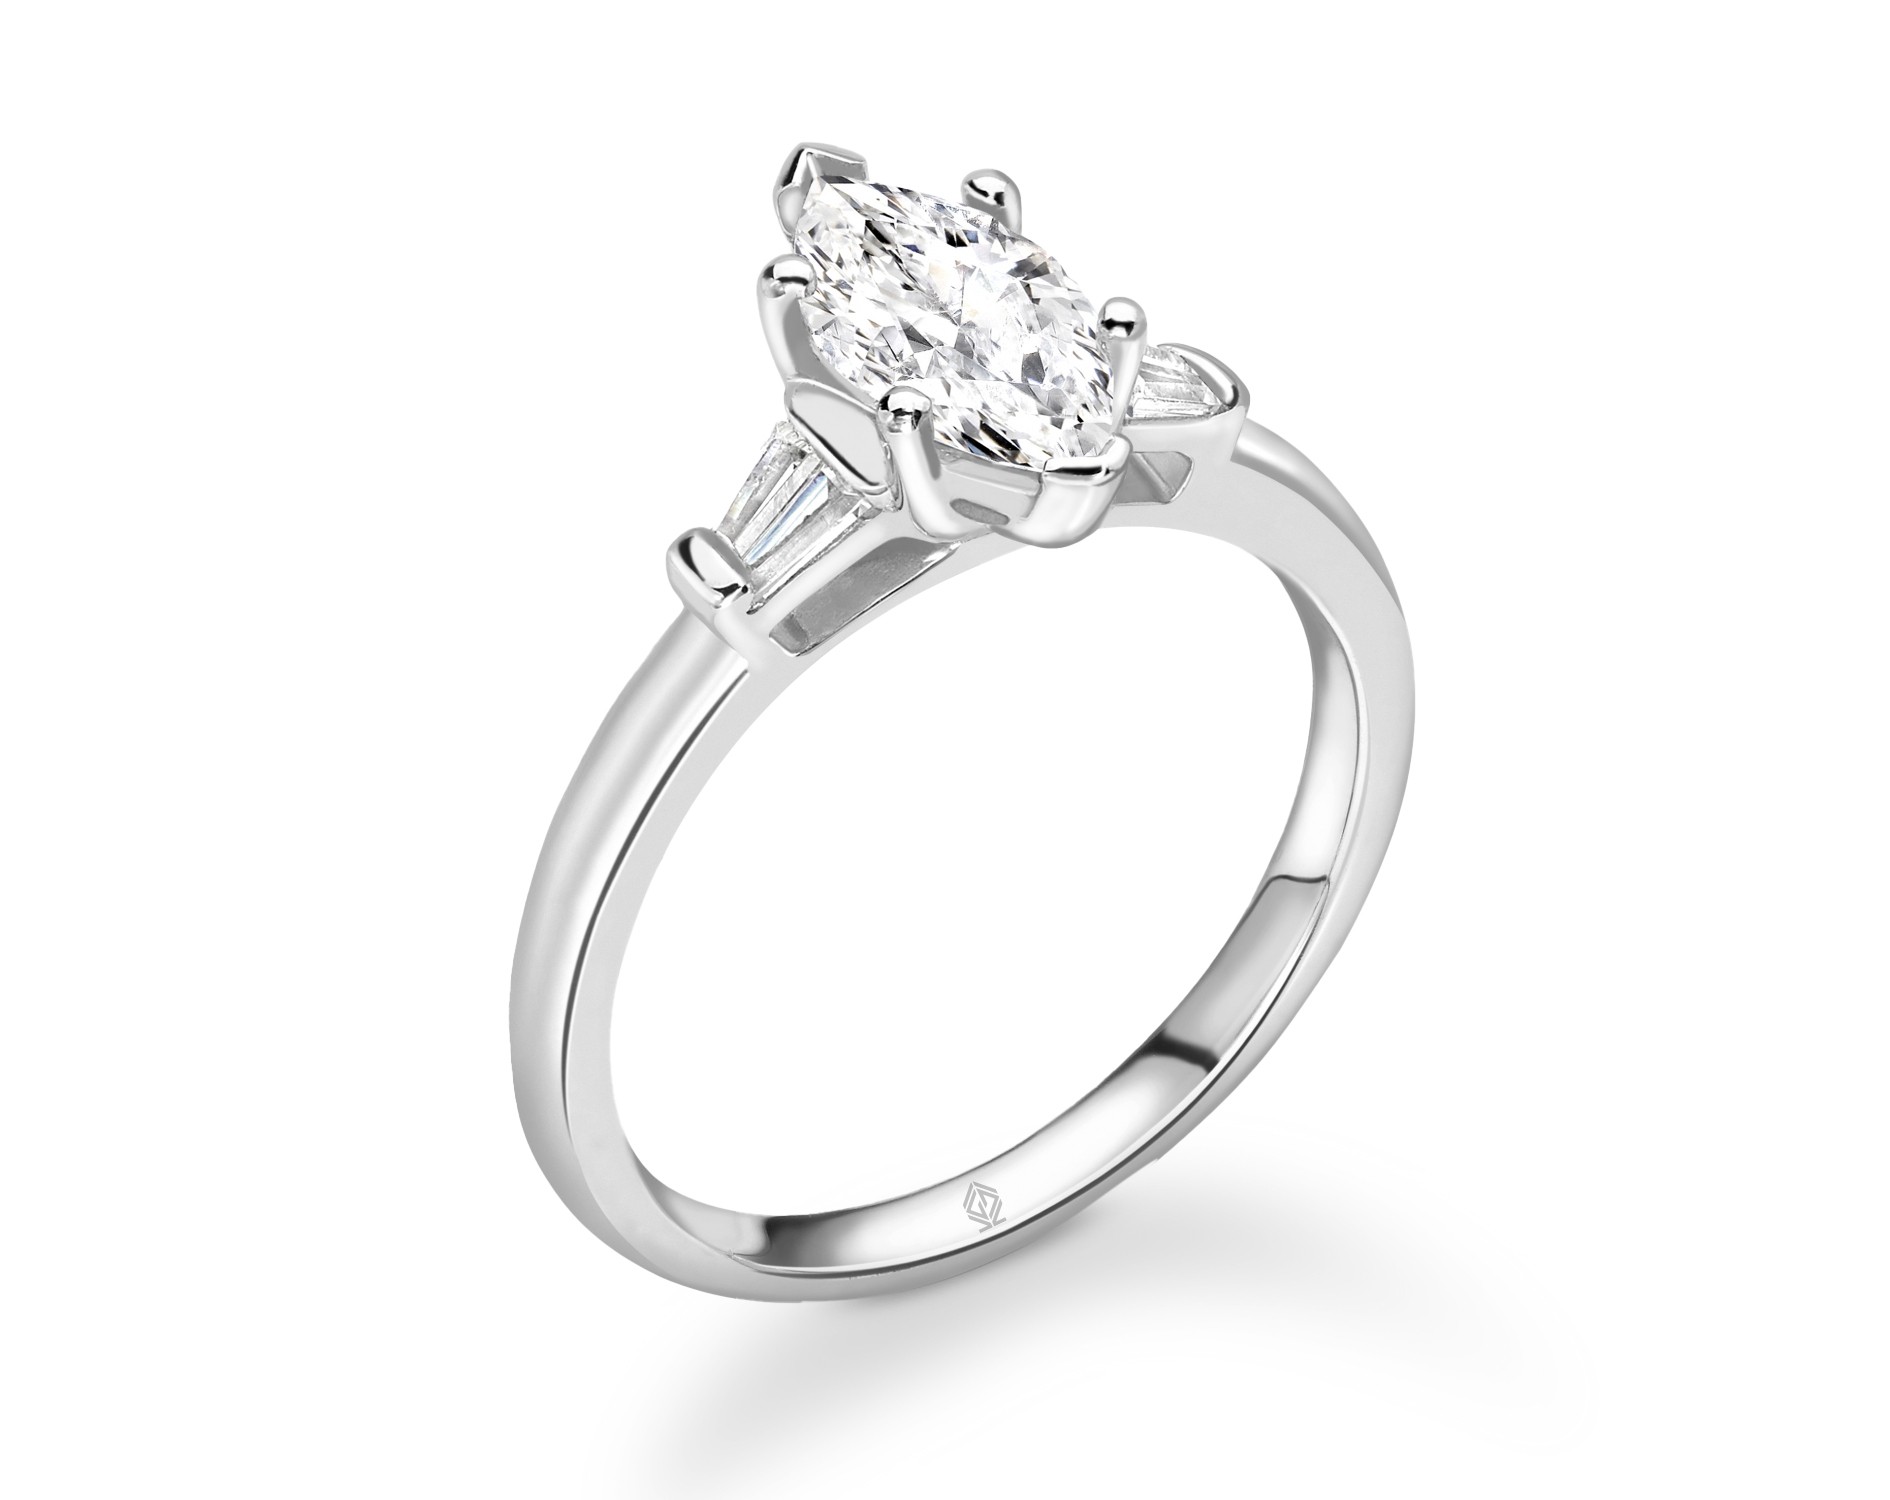 18K WHITE GOLD MARQUISE CUT DIAMOND ENGAGEMENT RING WITH BAGUETTES CUT SIDE STONES